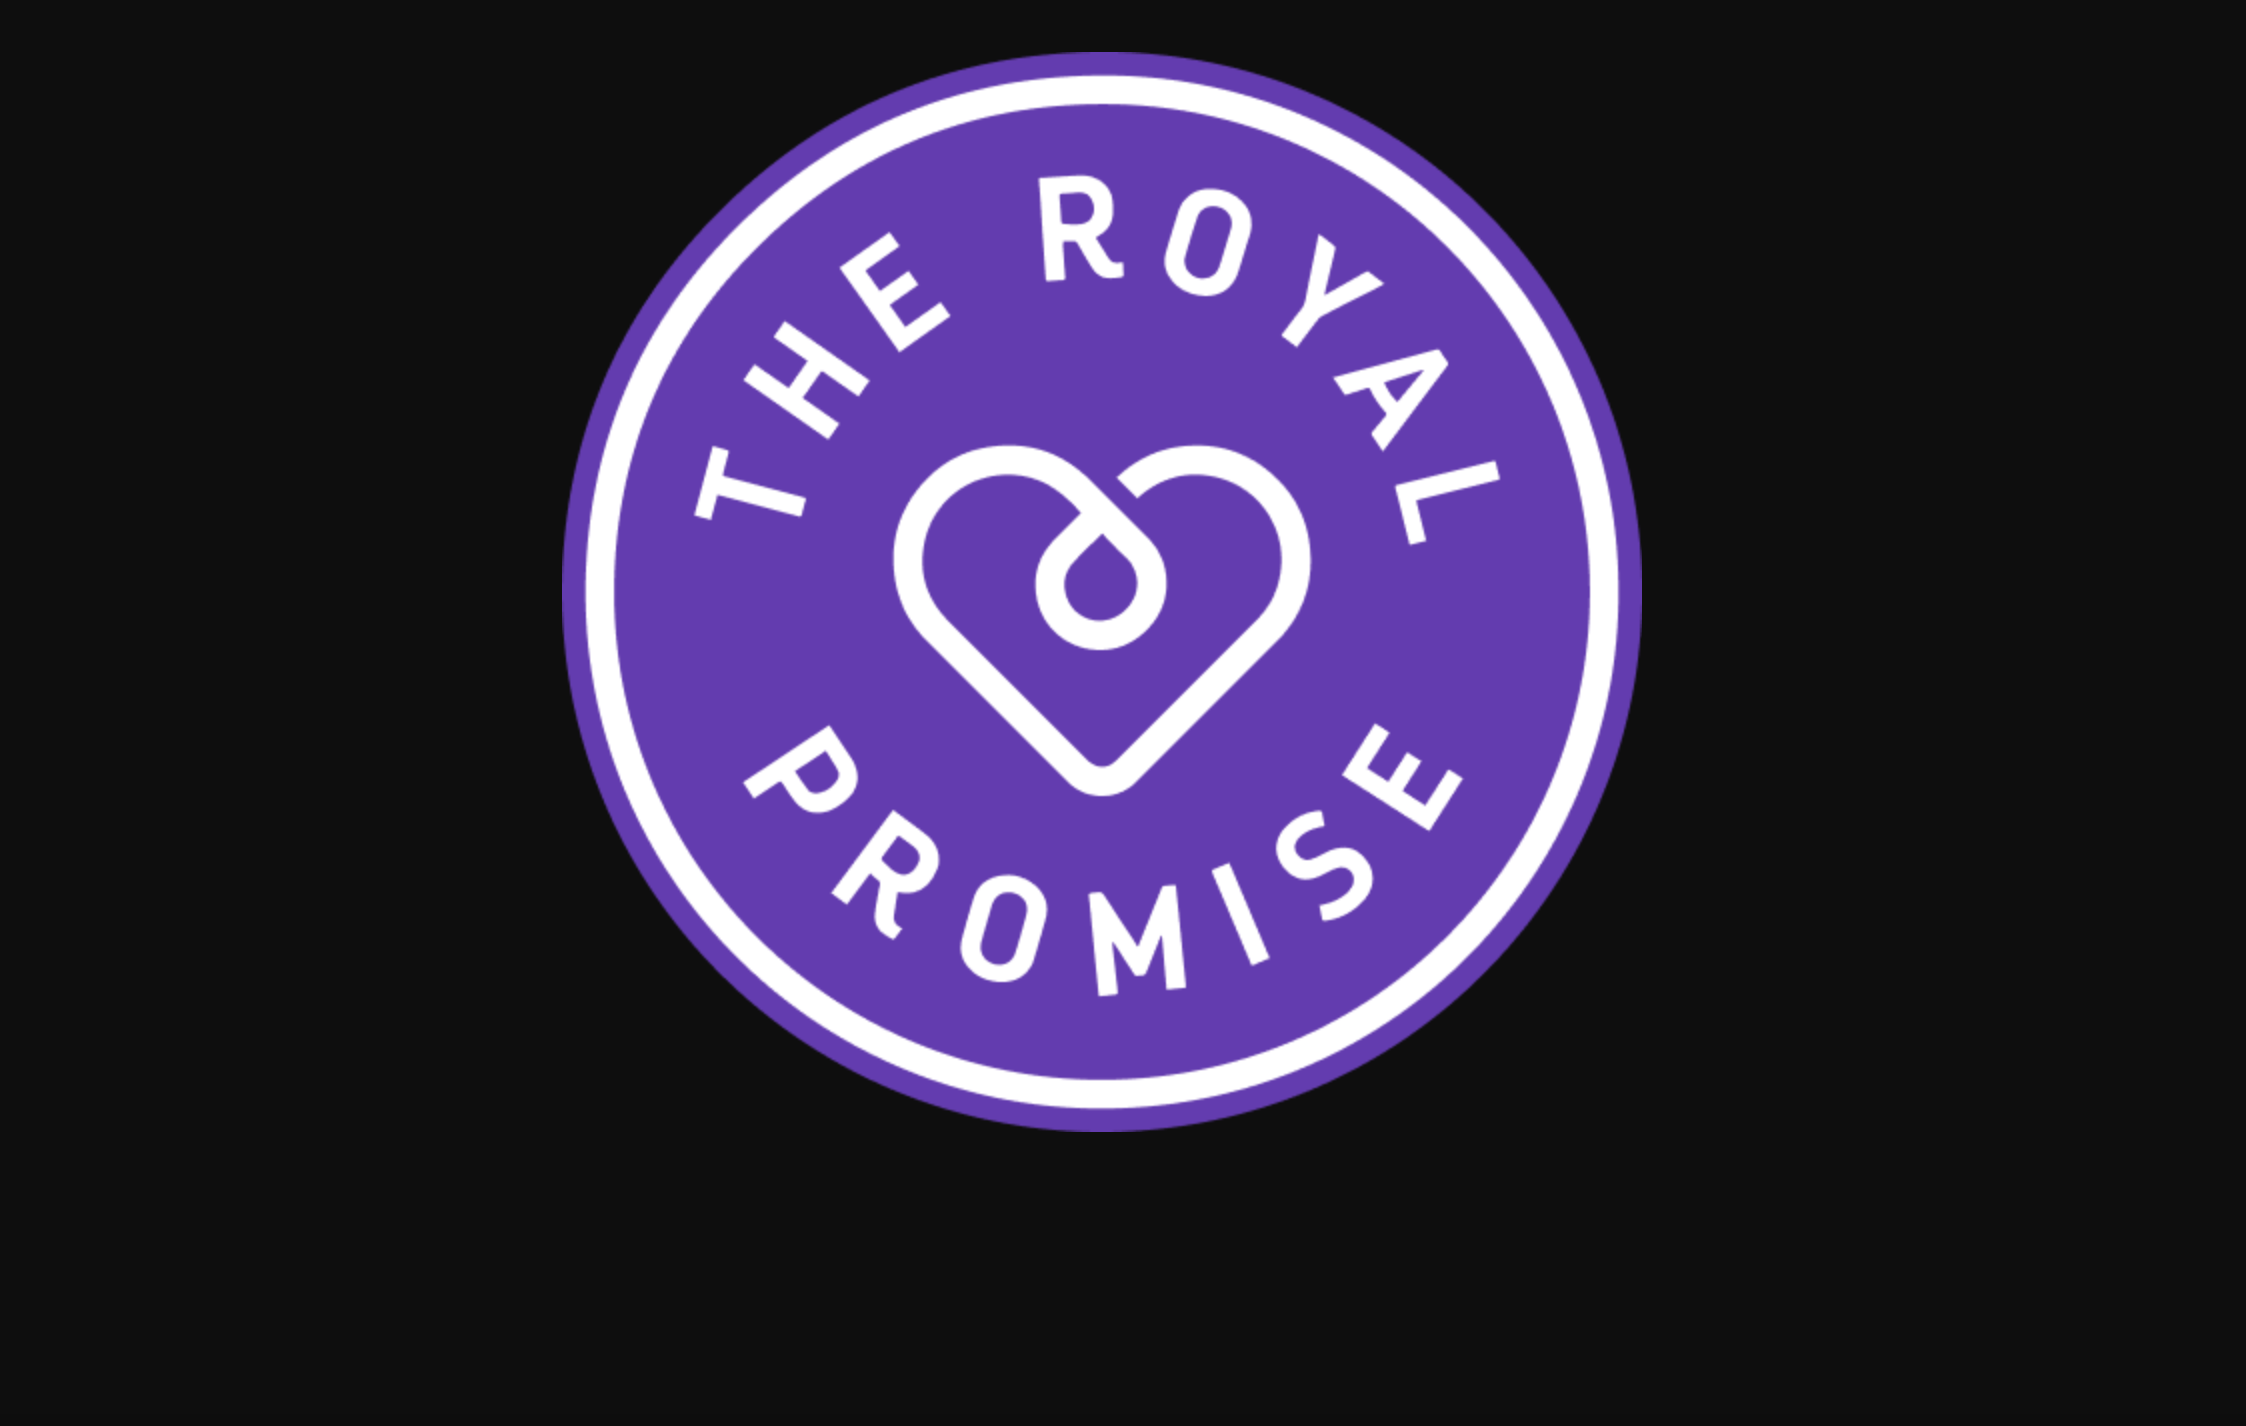 The Royal Promise